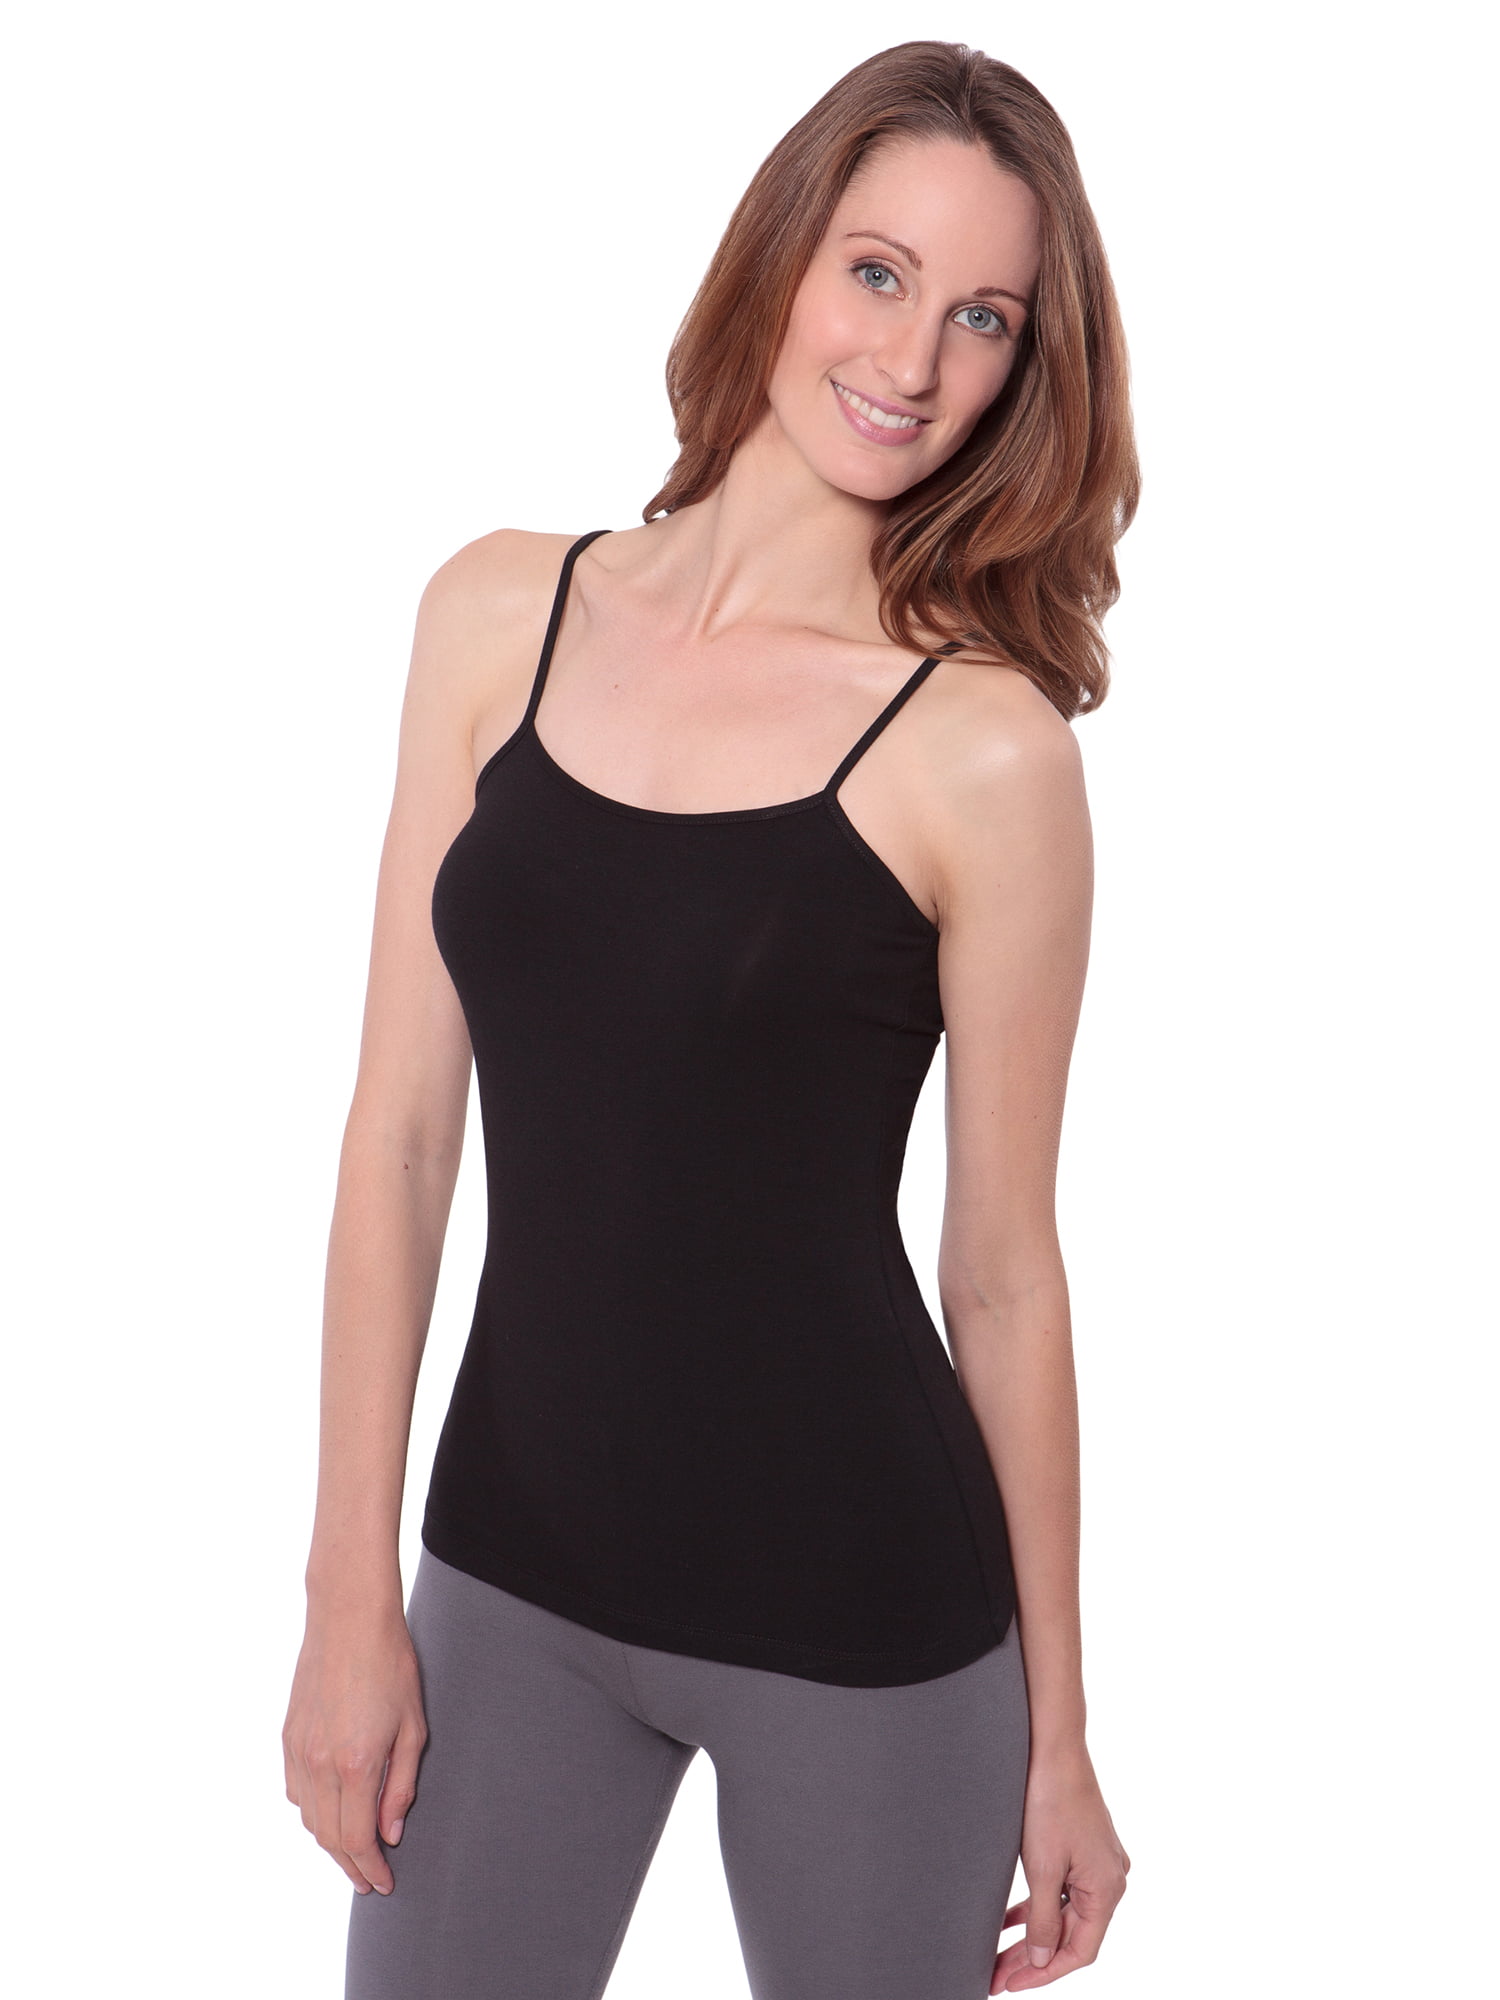 Women's Camisole Tank Tops - Bamboo Viscose Layering Top by Texere ...